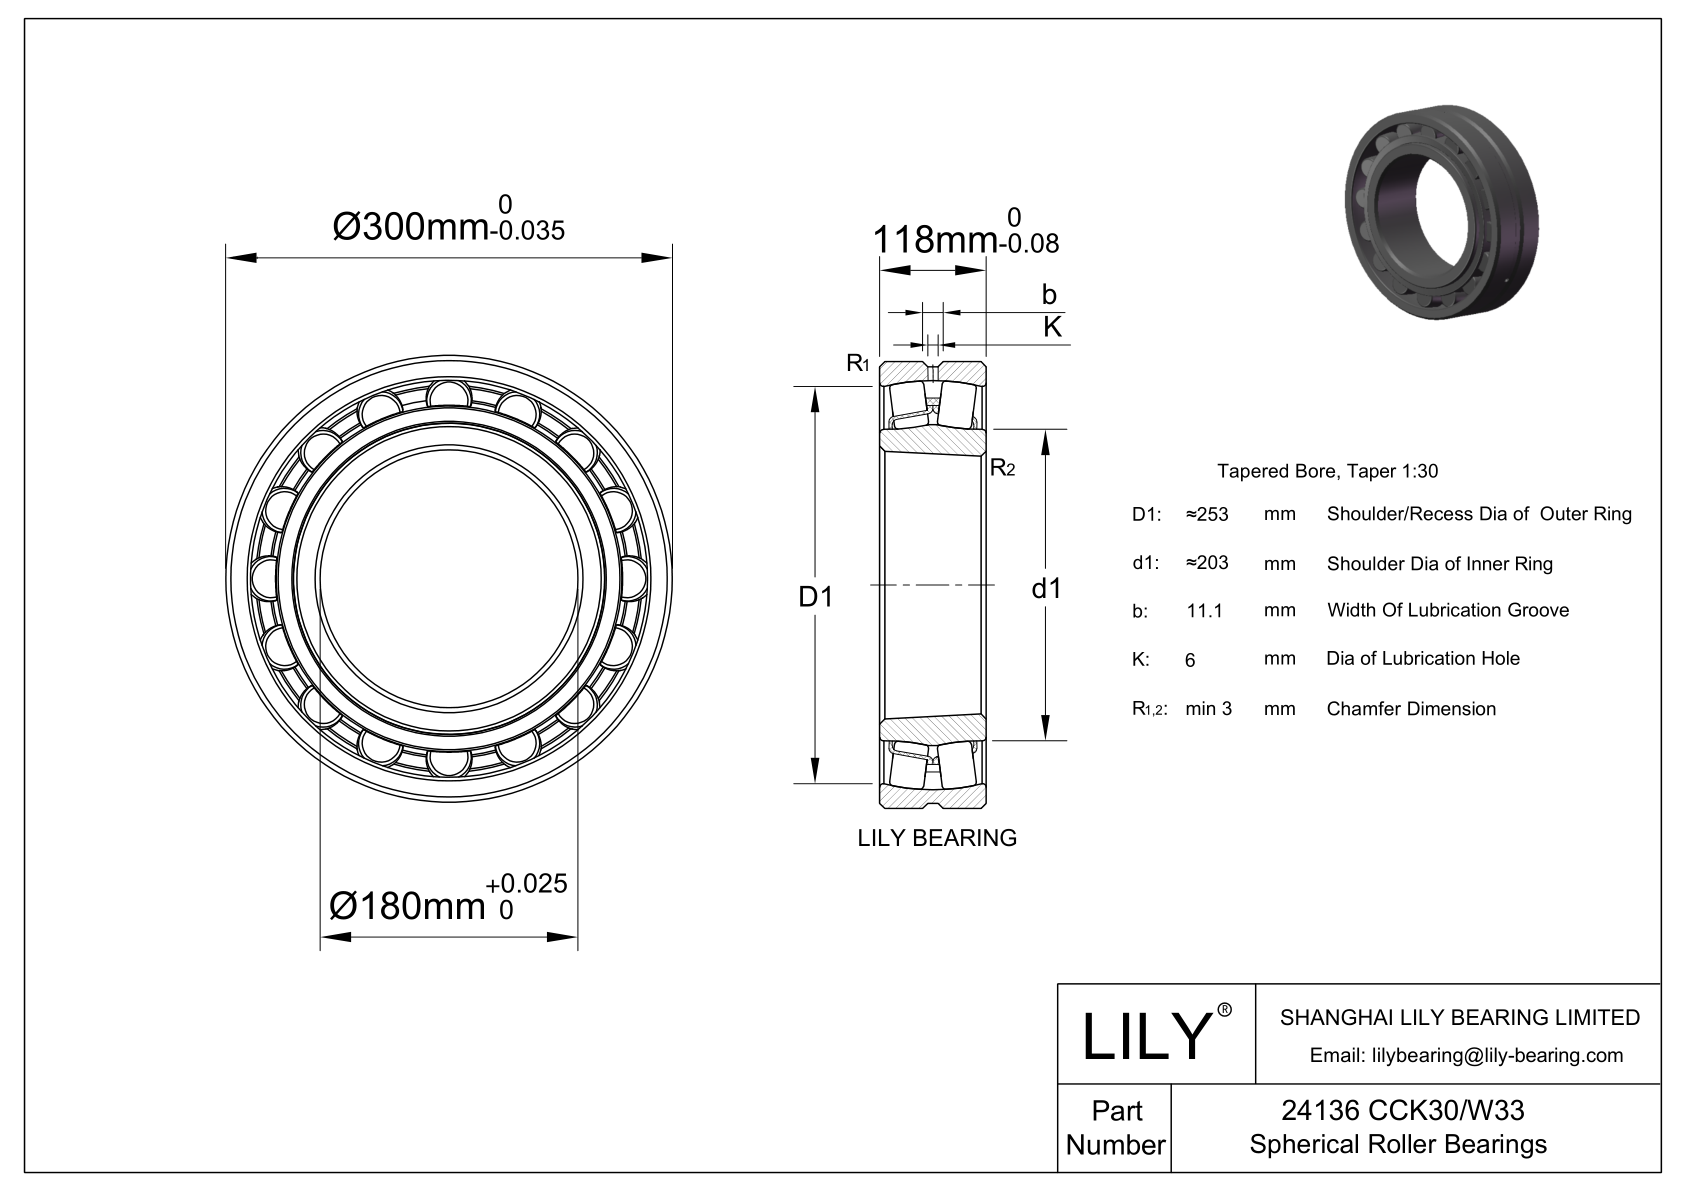 24136 CCK30/W33 Double Row Spherical Roller Bearing cad drawing